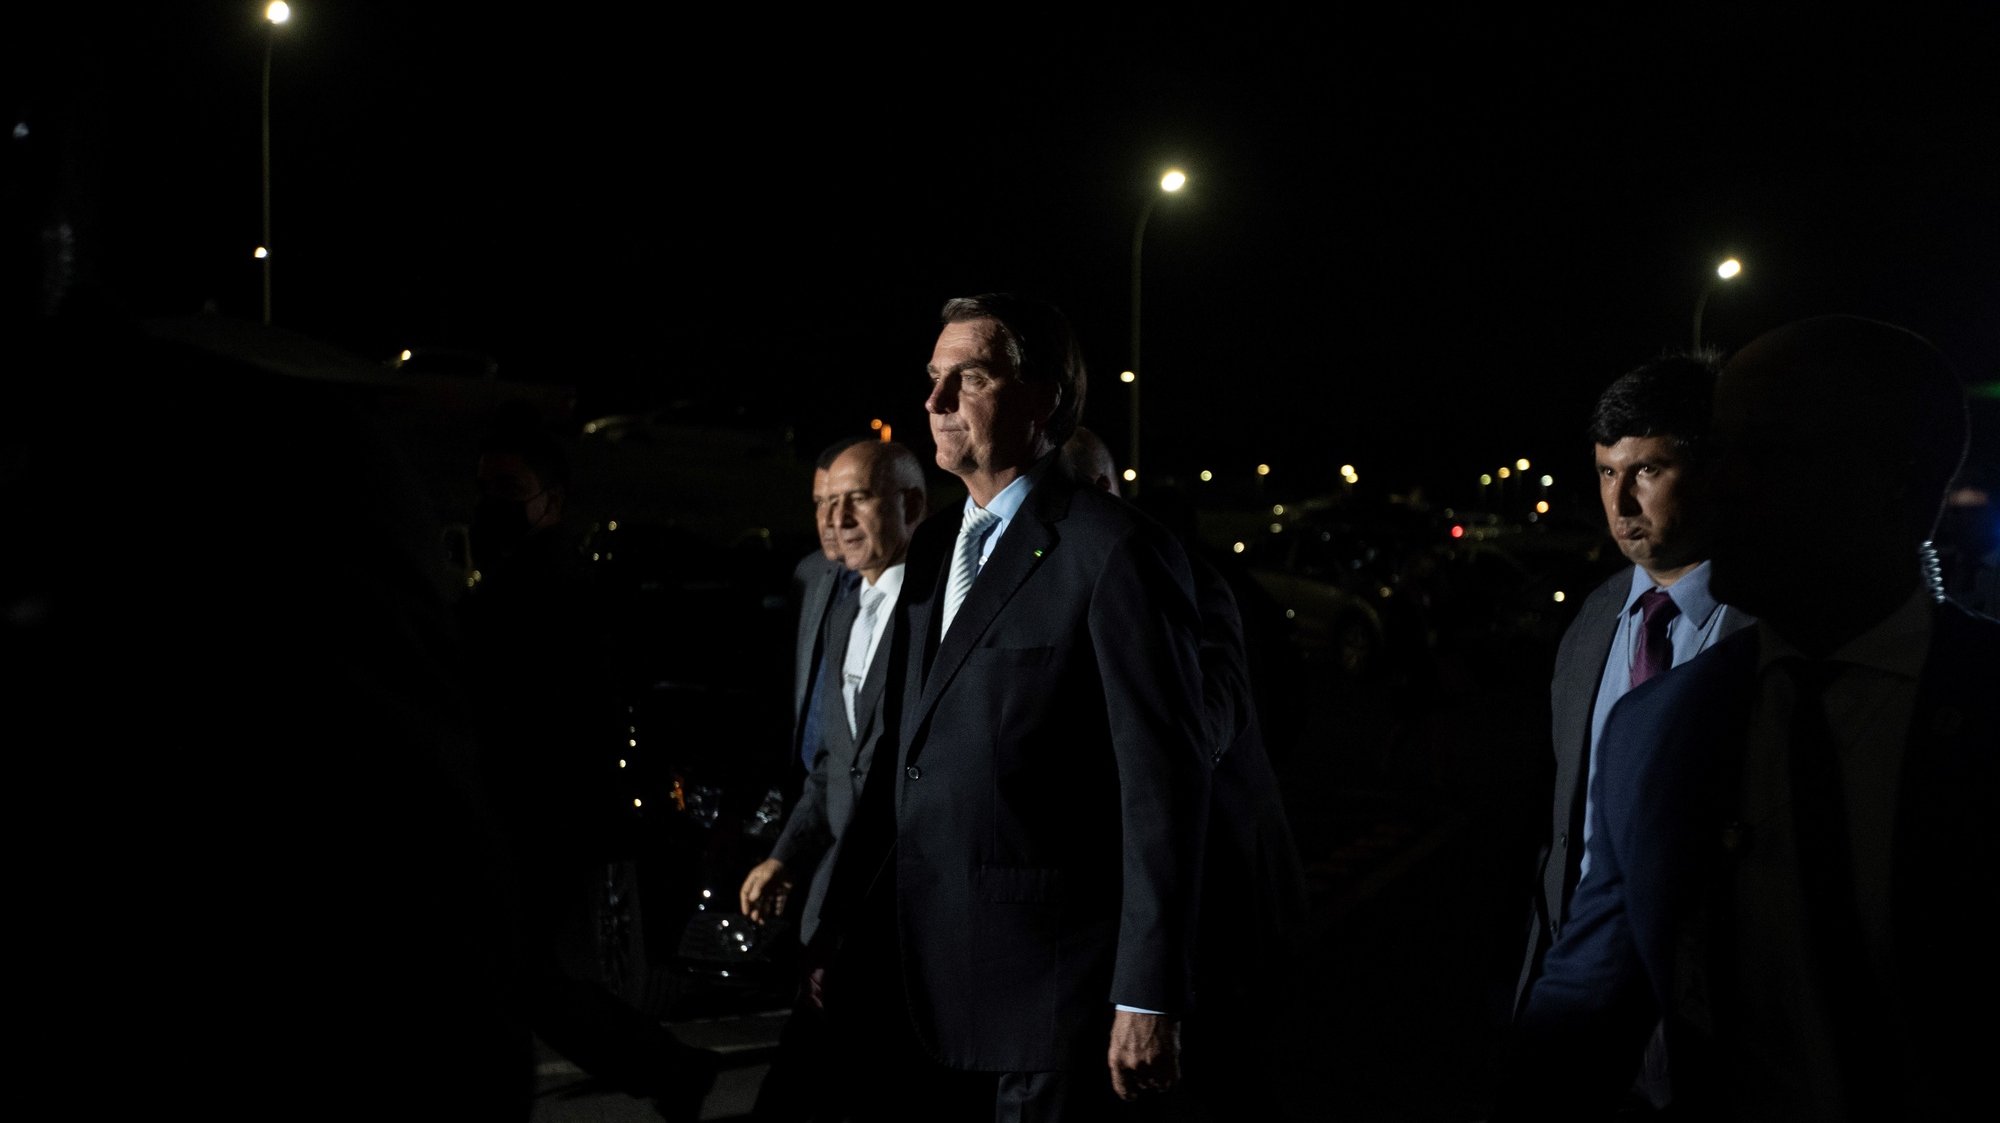 epa09034866 The President of Brazil Jair Bolsonaro (c) leaves the Planalto Palace towards the National Congress building, after the ceremony of approval of the Central Bank Autonomy Law, in Brasilia, Brazil, 24 February 2021. Brazilian President Jair Bolsonaro renewed his Government with changes in two ministries and sanctioned a law that gives autonomy to the Central Bank, which is part of his objective of liberalizing the country&#039;s economy.  EPA/Joedson Alves